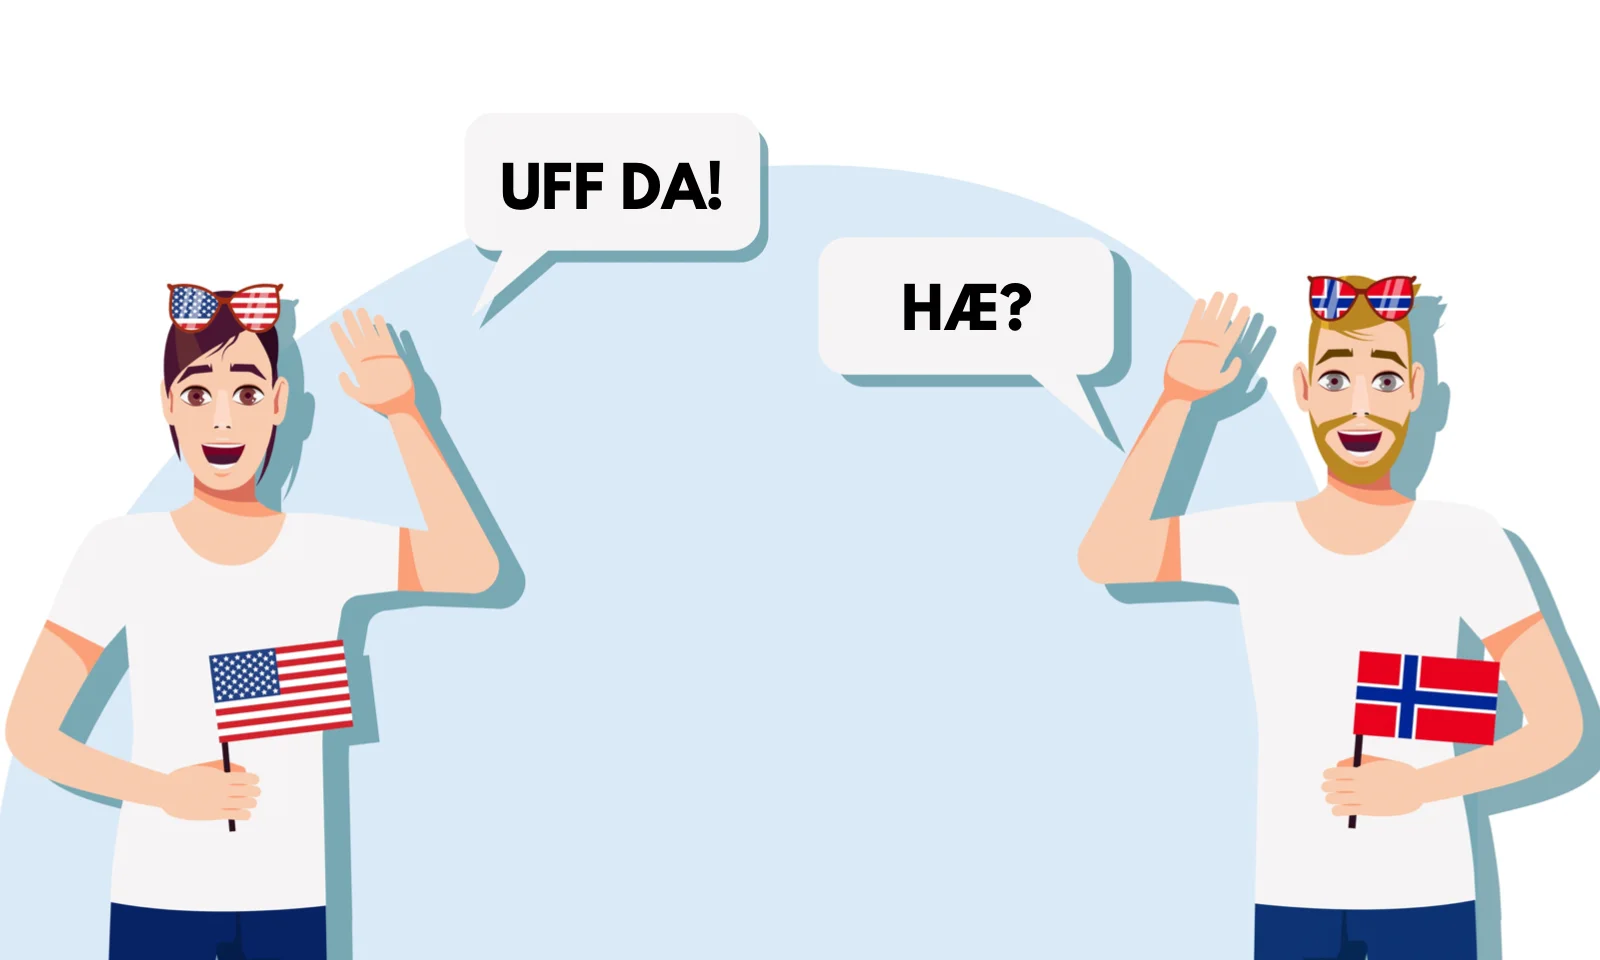 The use of Uff Da in USA and Norway